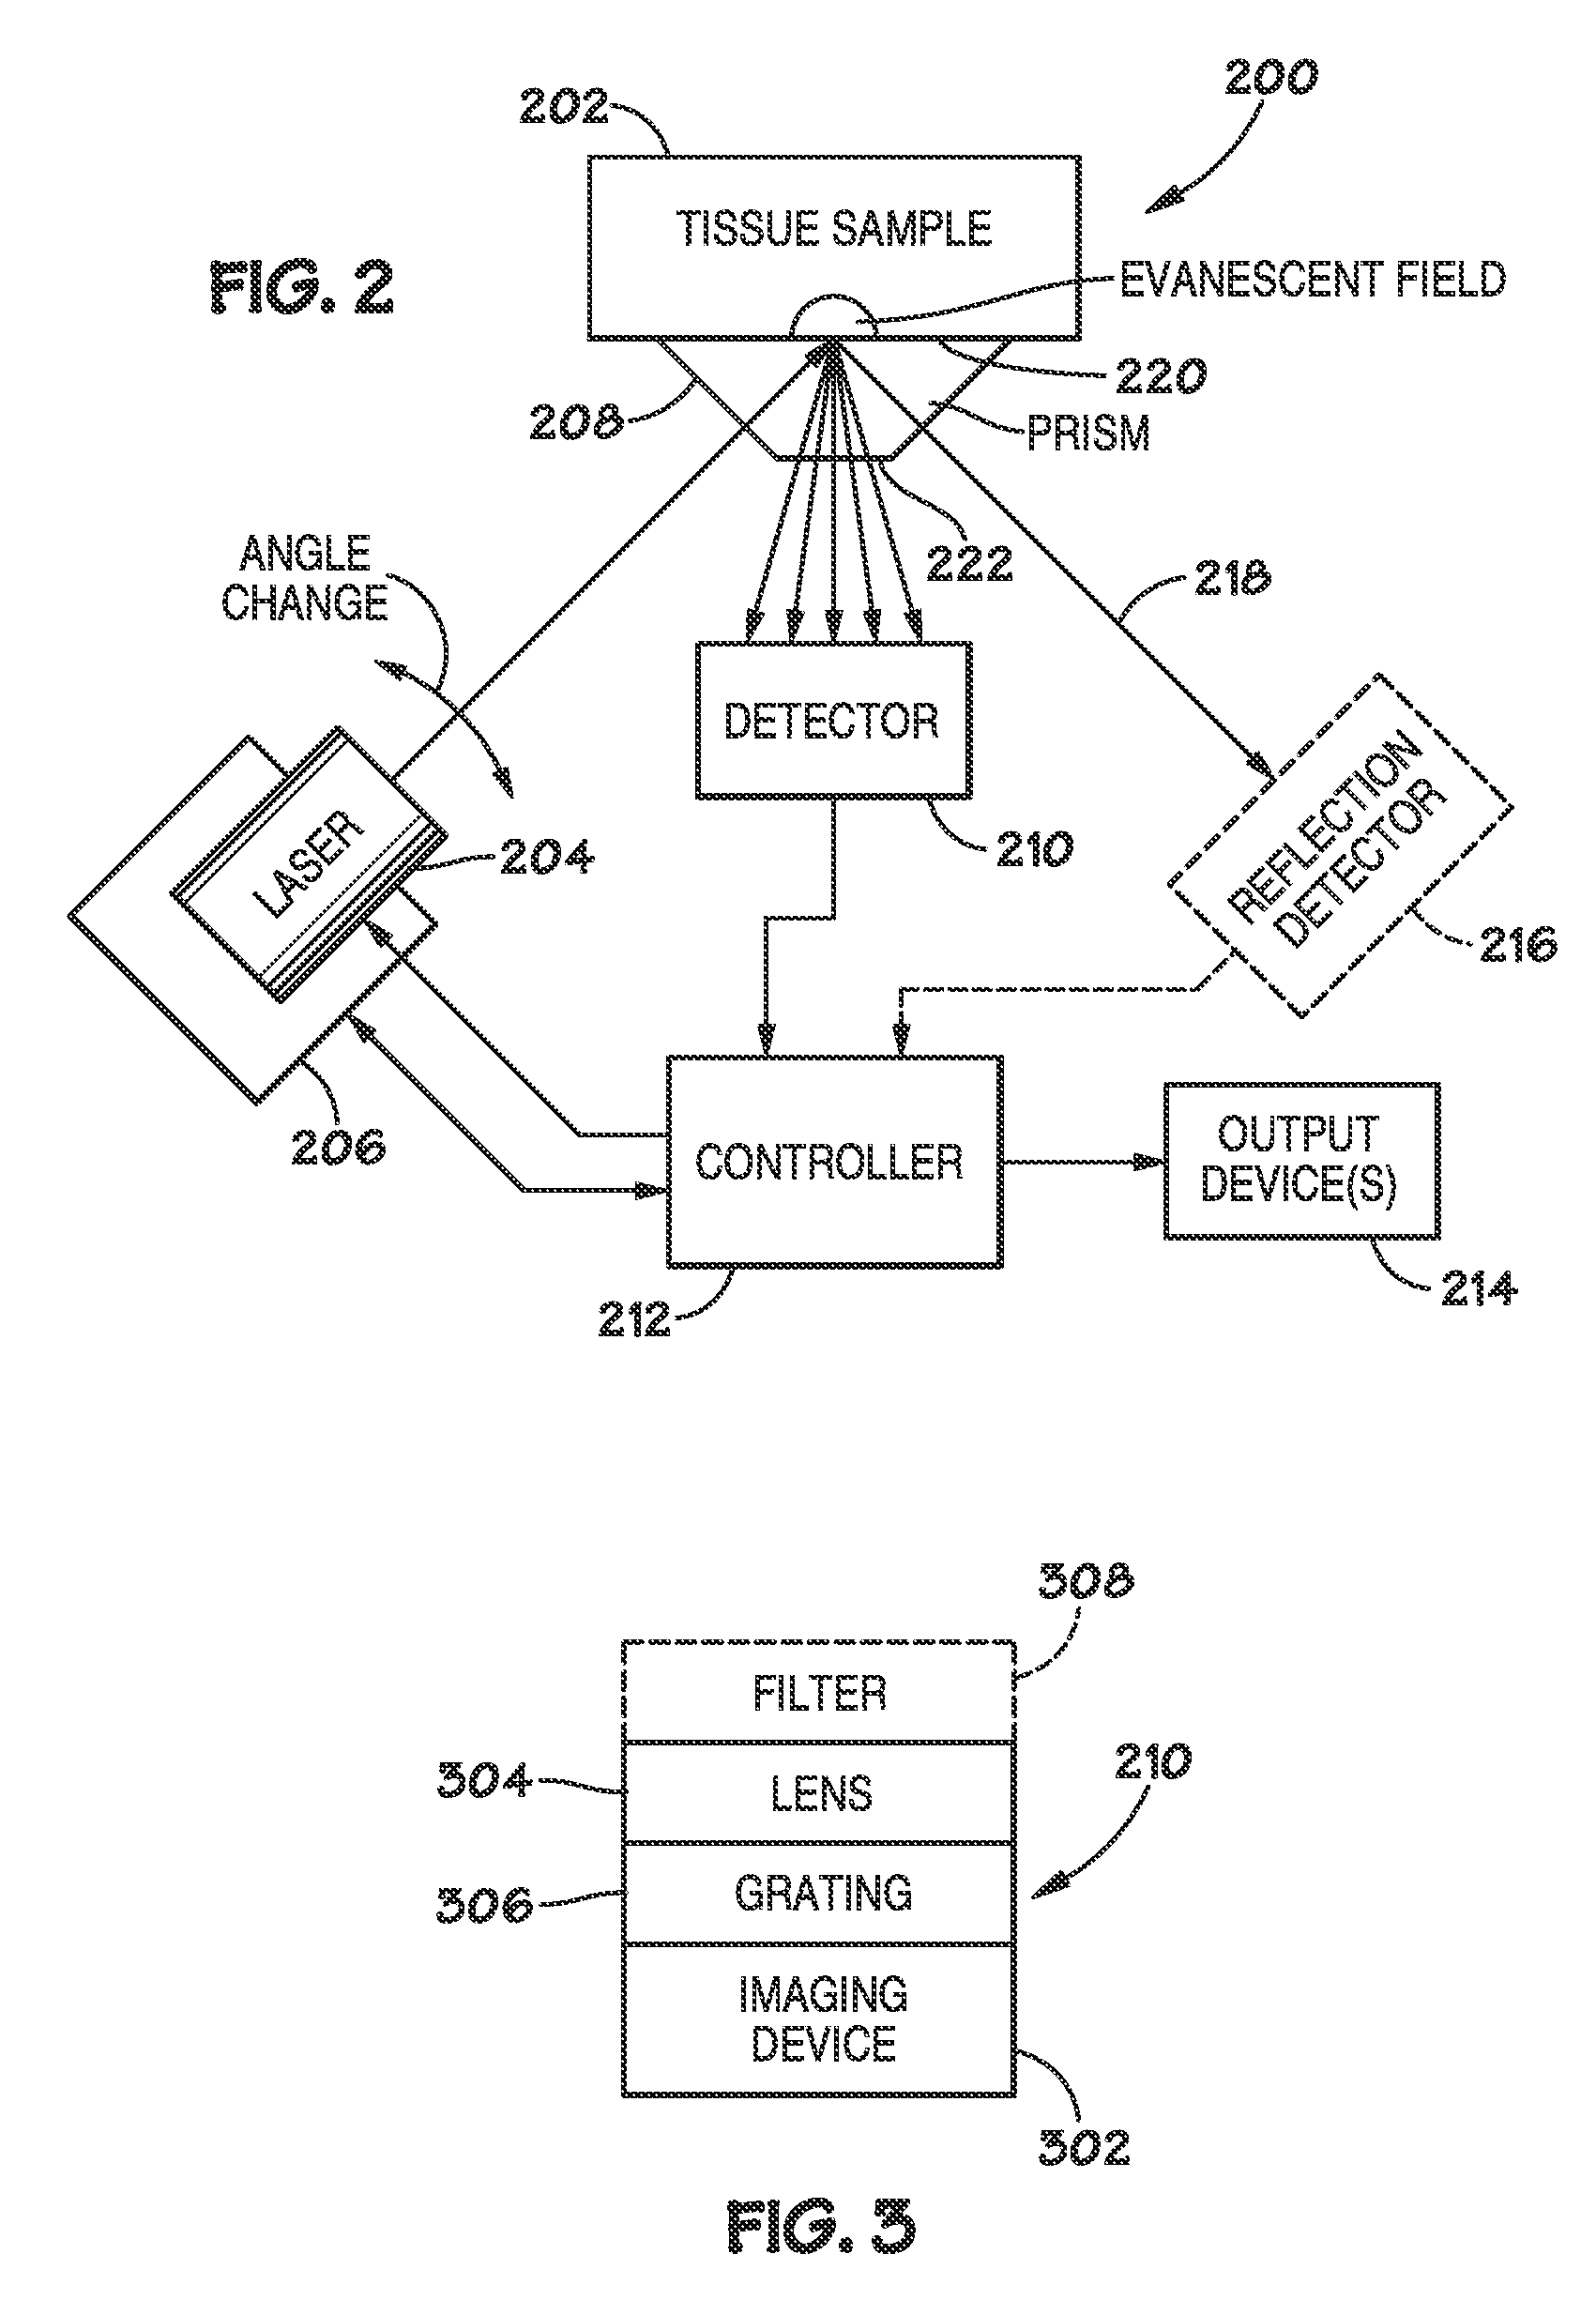 Method and apparatus for evaluating a sample through variable angle Raman spectroscopy